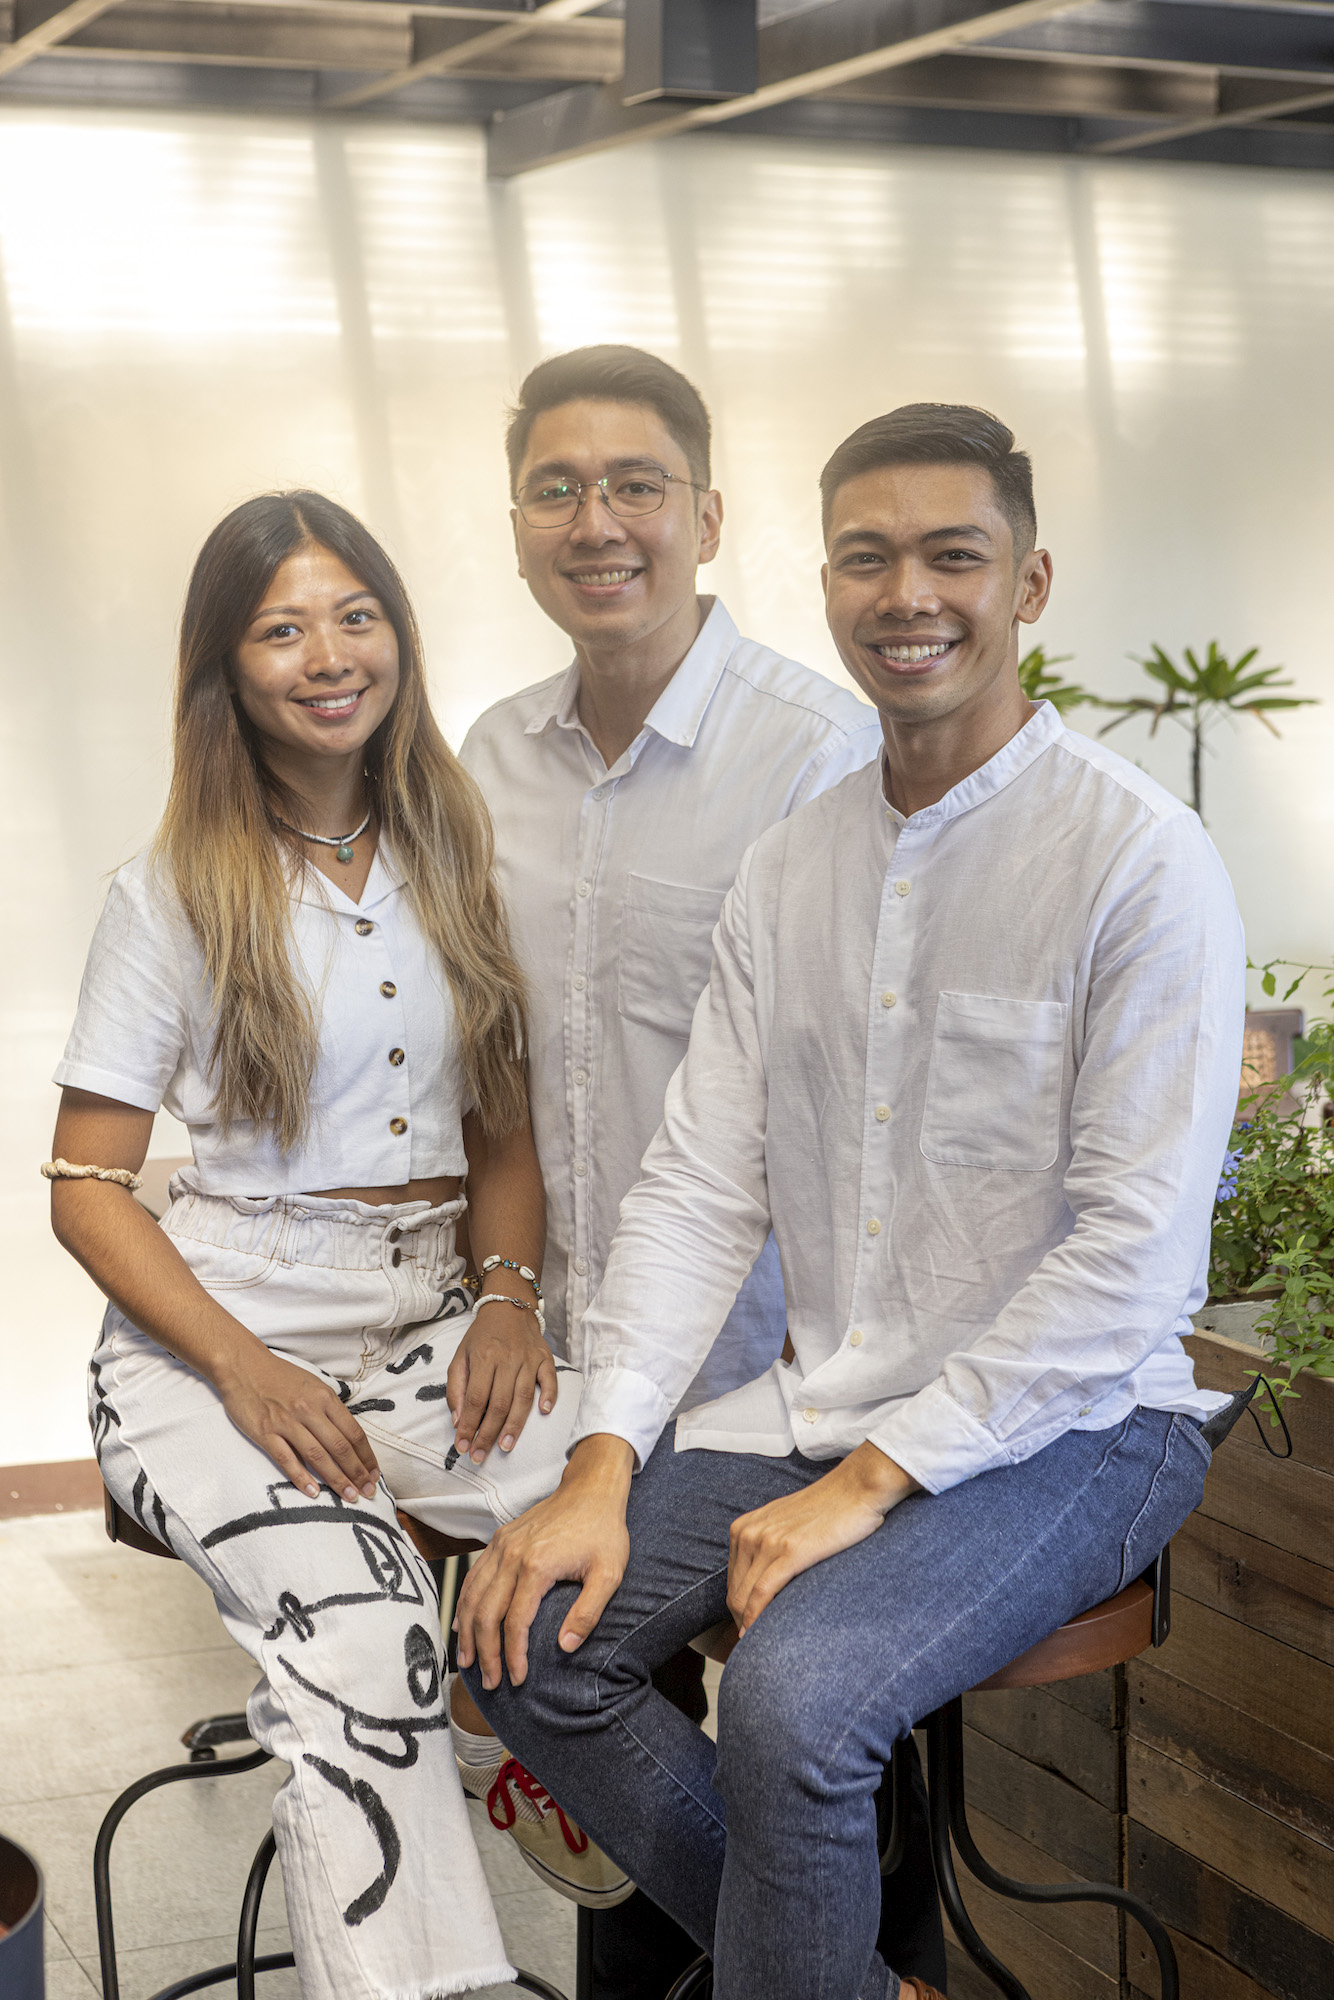 The third generation entrepreneurs of Little Quiapo: Angela, Miguel, and Martin